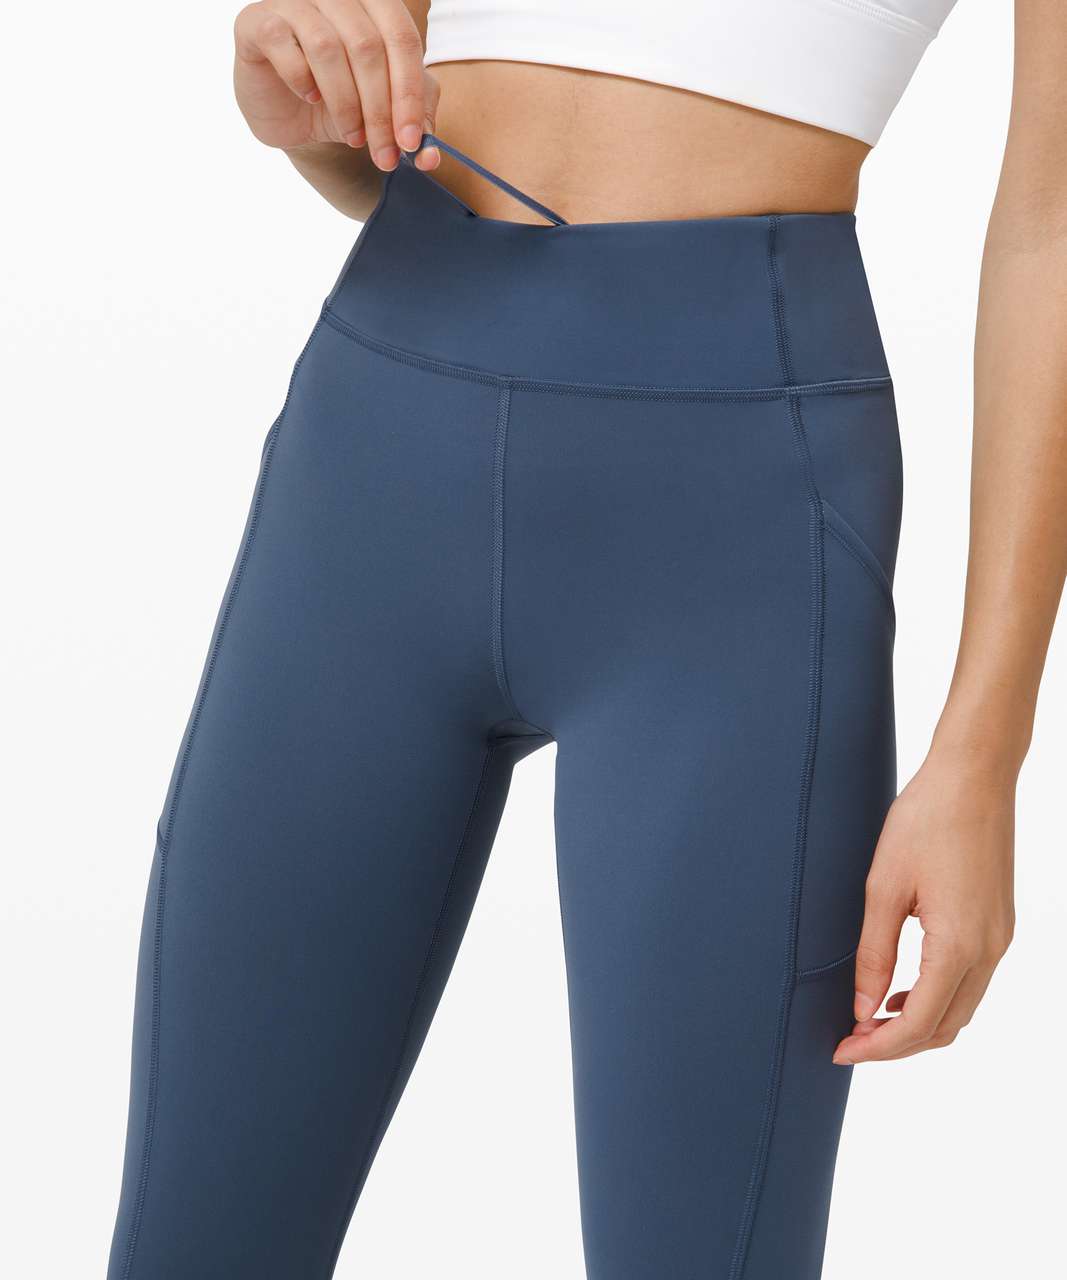 Lululemon INVIGORATE HIGH-RISE TIGHT 25 Blue Size 6 - $80 (37% Off Retail)  - From A